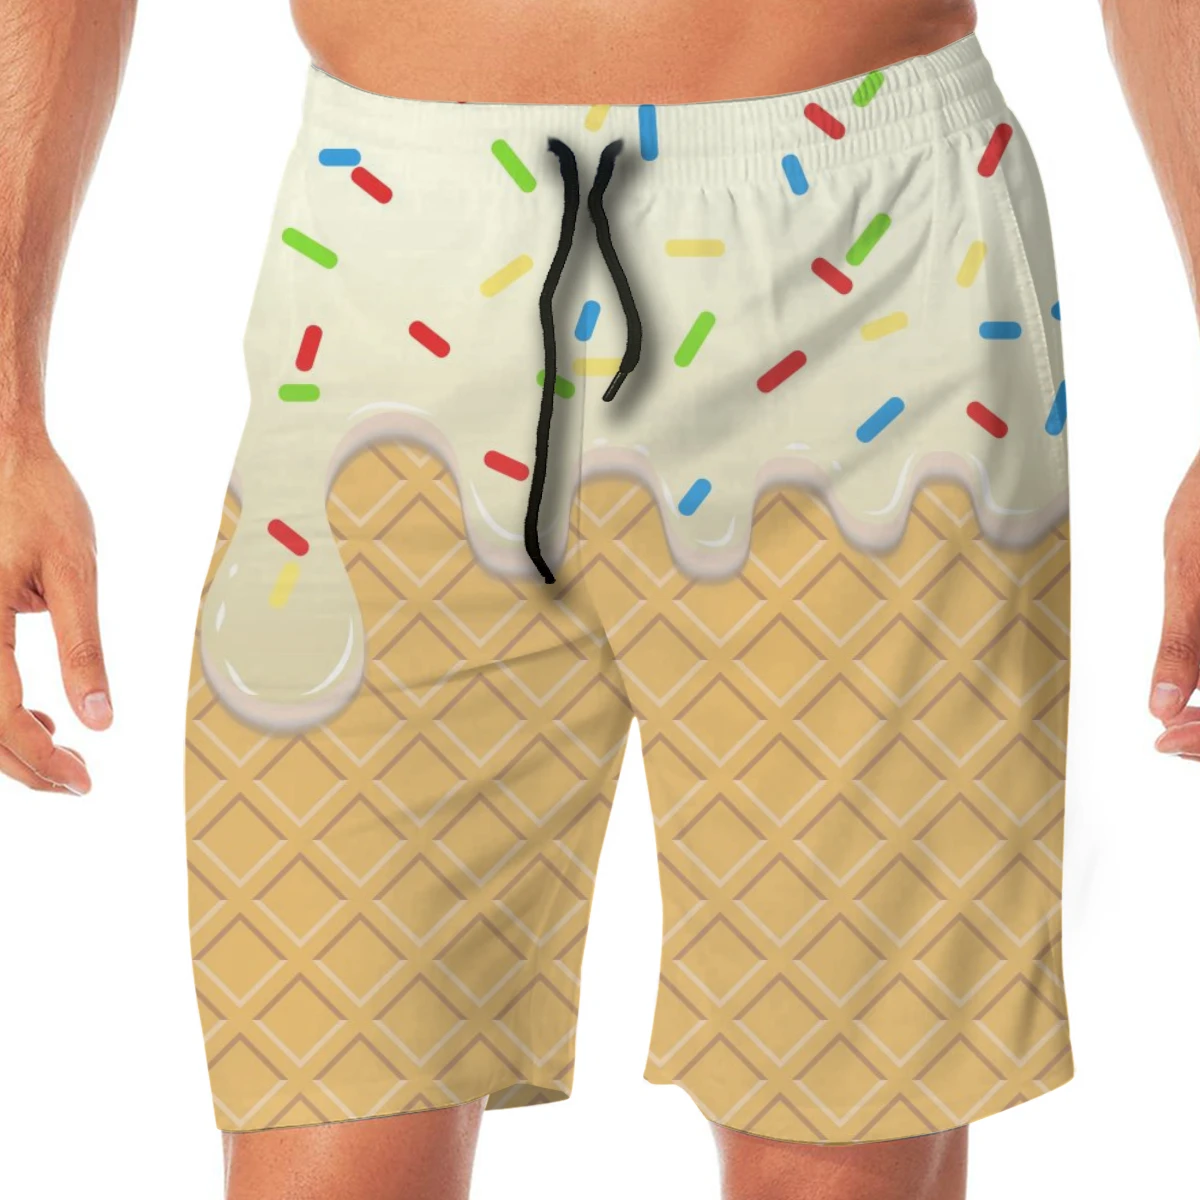 

Cute Wafer Cookie Cream Men's Beach Pants Quick Drying Beach Shorts Swimming Surfing Boating Water Sports Trunks Swimwear Shorts